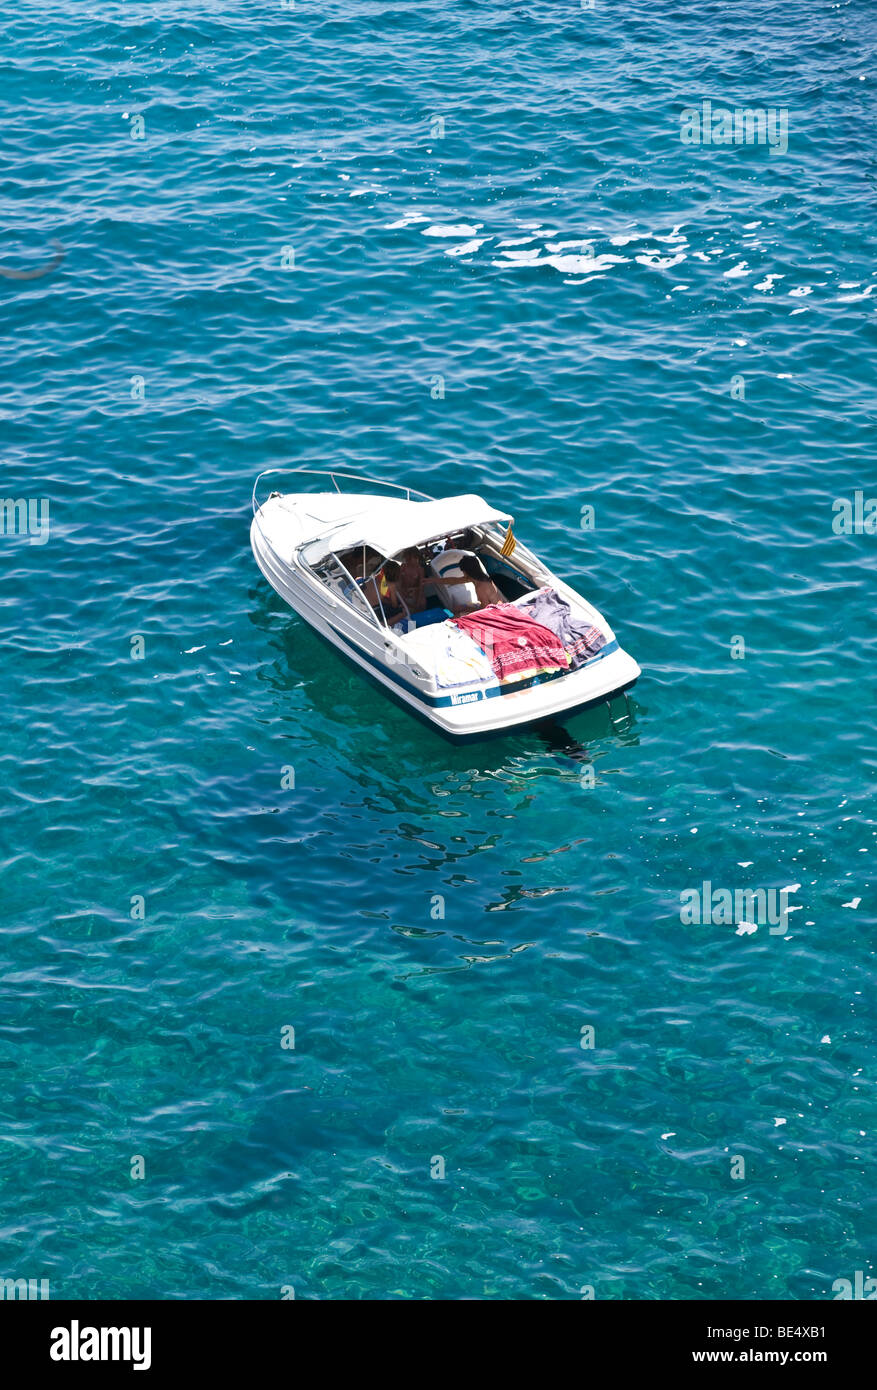 A boat in the middle of the sea, Palamos, Girona, Spain, UK Stock Photo